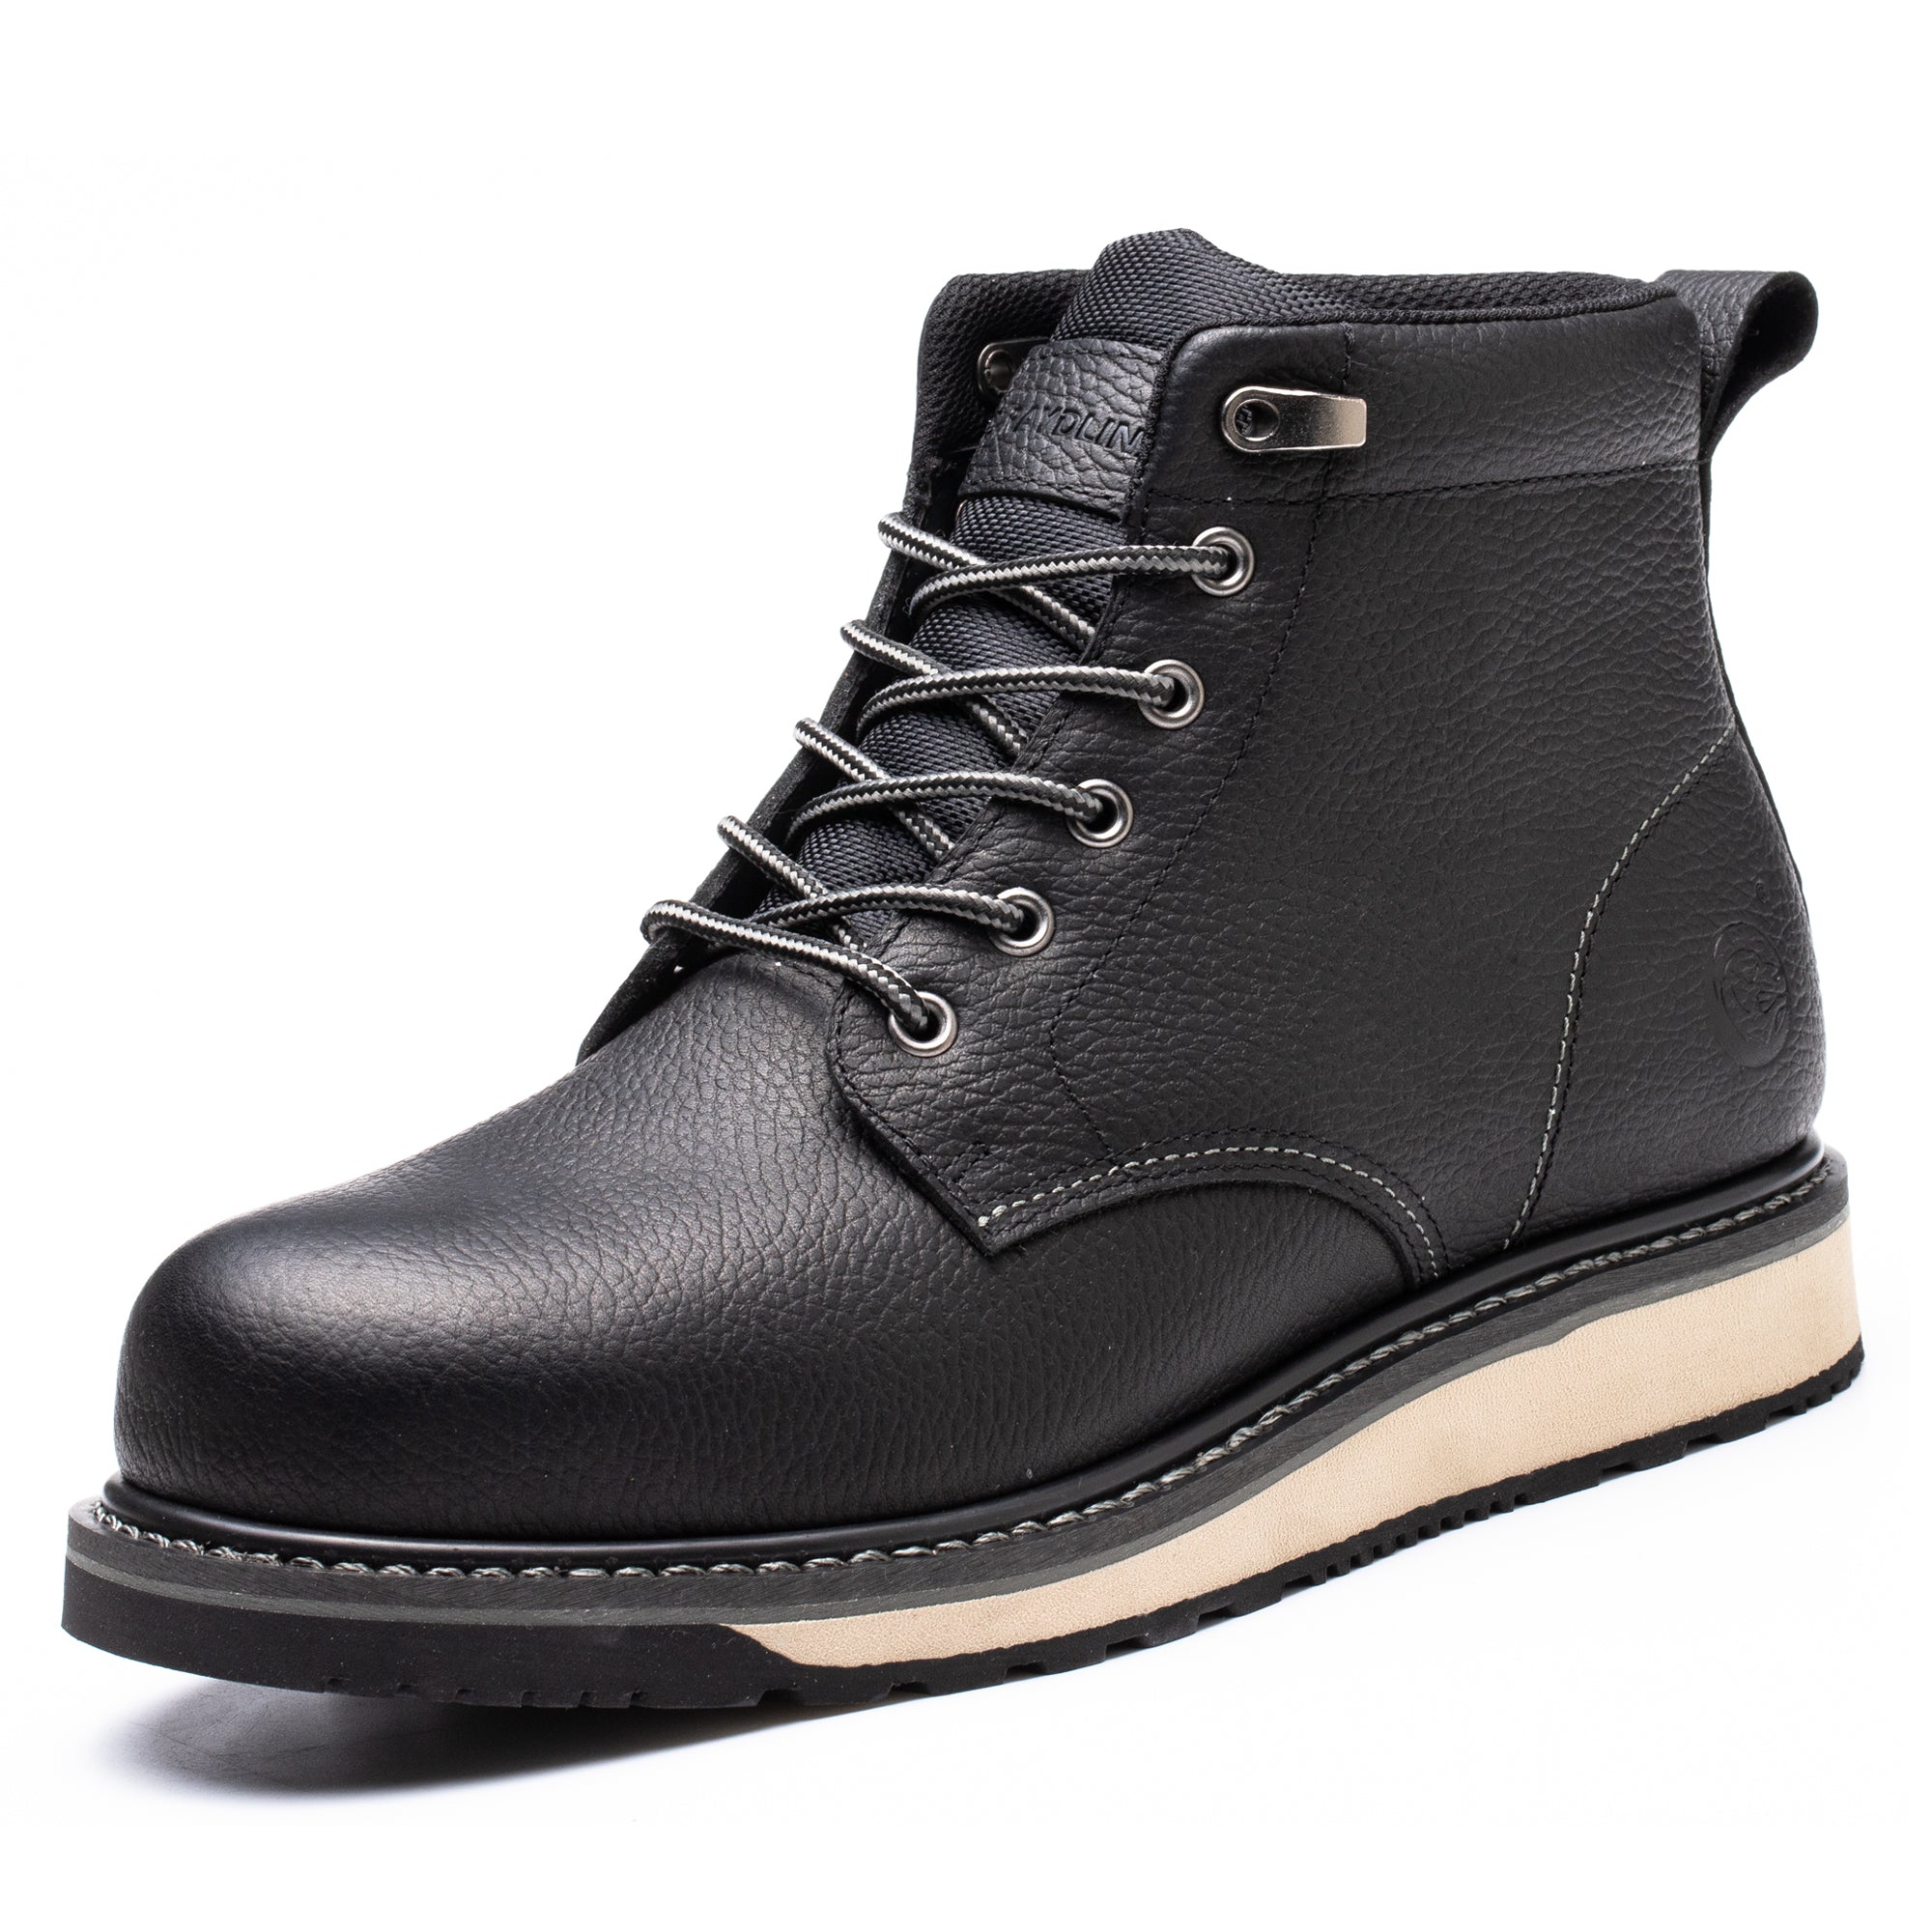 QLTY  Work Boot - The DNVR Steel Toe - Safety Toe, Moc Toe, Goodyear Welt,  White Sole, 6” - QLTY Work Boots